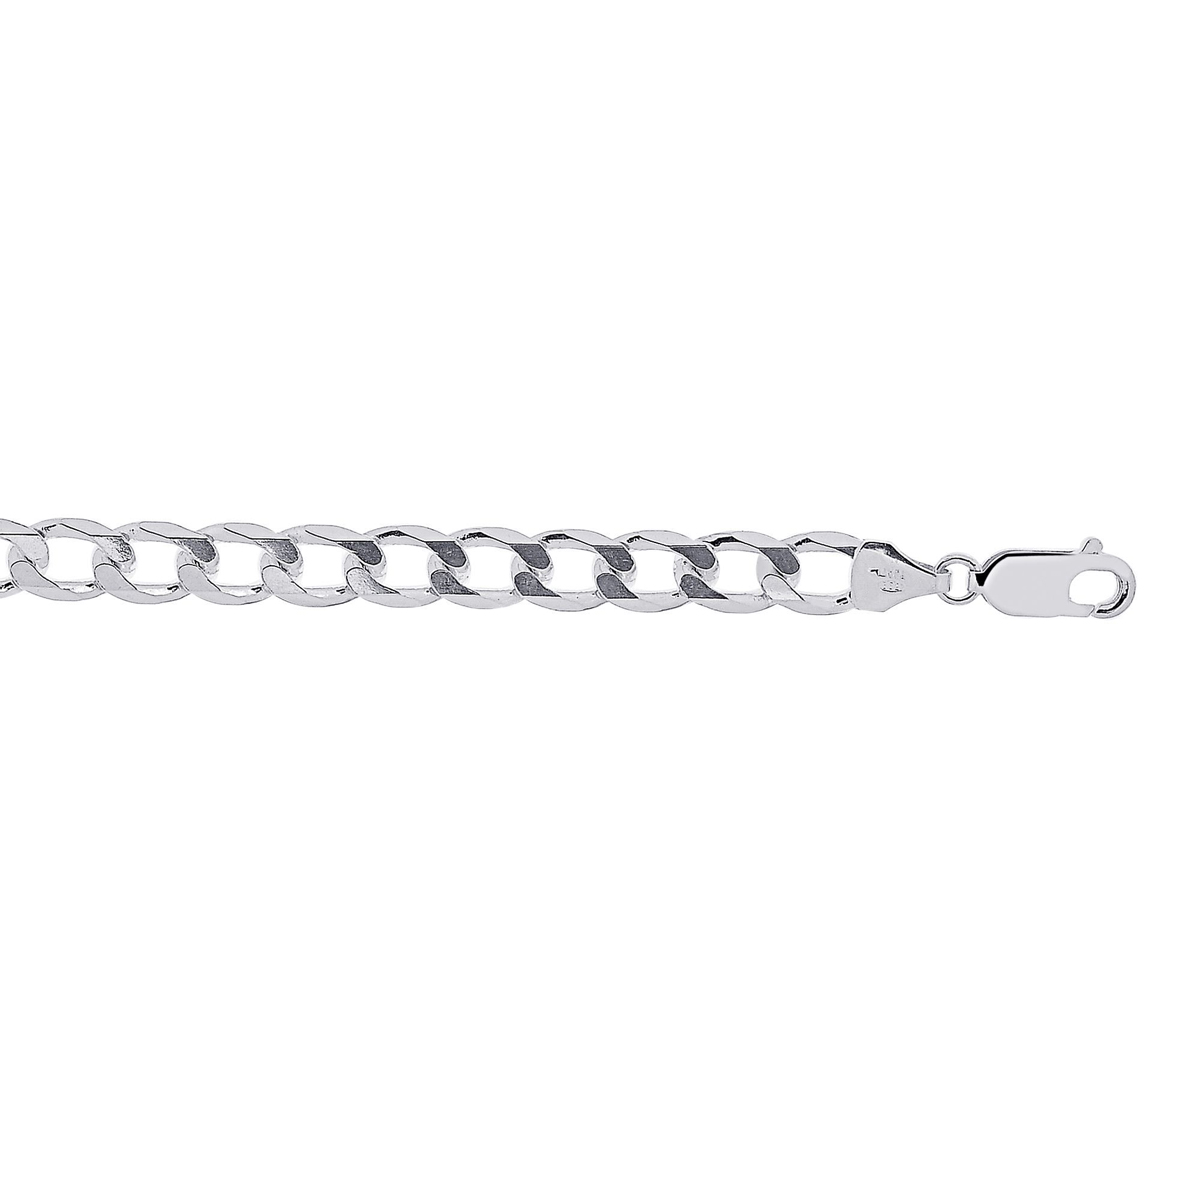 Sterling Silver 5.1mm Diamond Cut Flat Curb Chain Bracelet Rhodium Finish Measuring 8.5" With Lobster Clasp